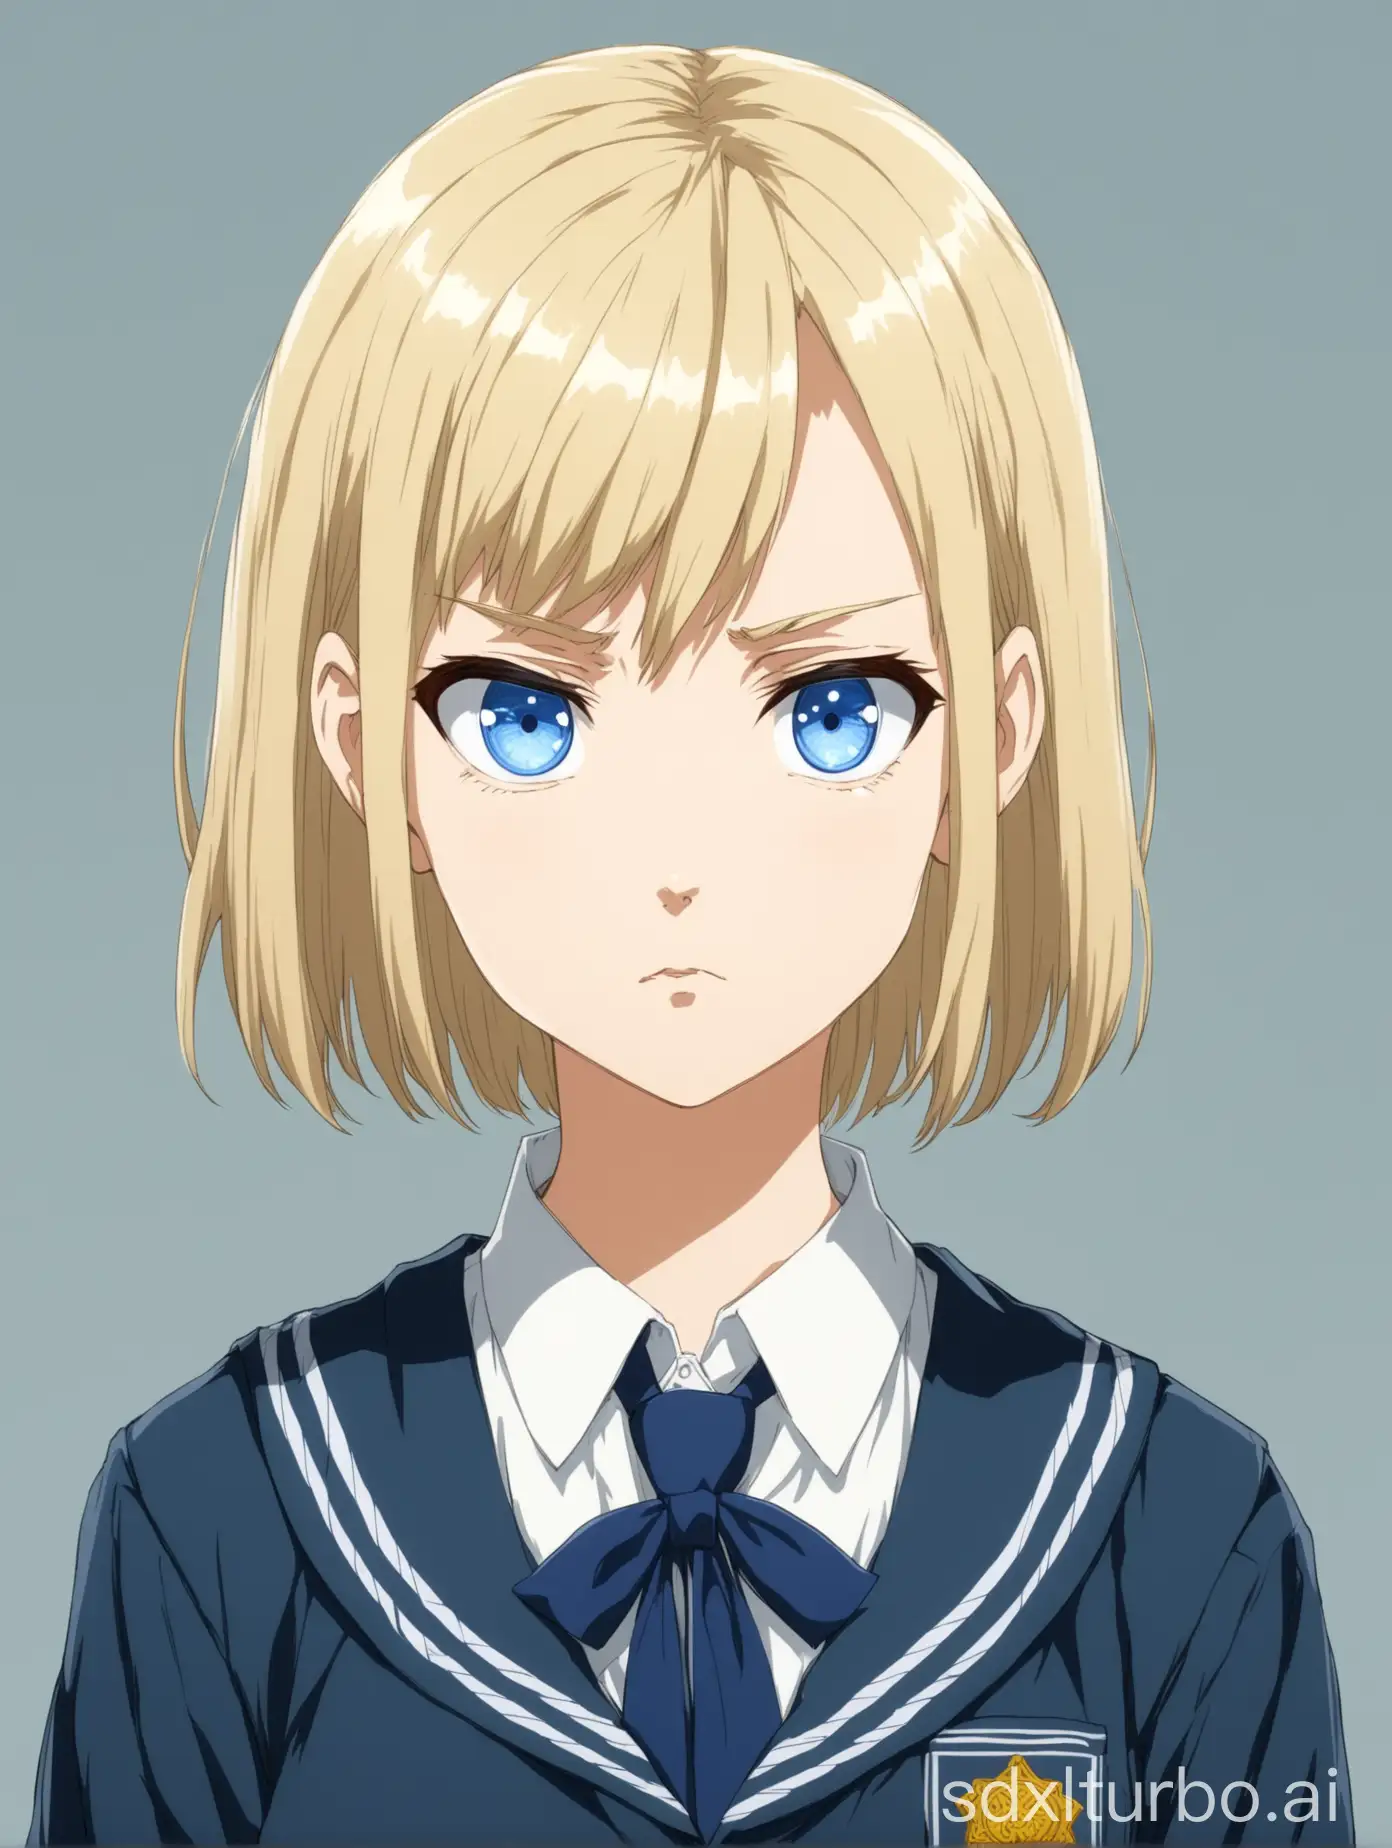 Serious-17YearOld-Anime-Girl-with-Blond-Hair-in-School-Uniform